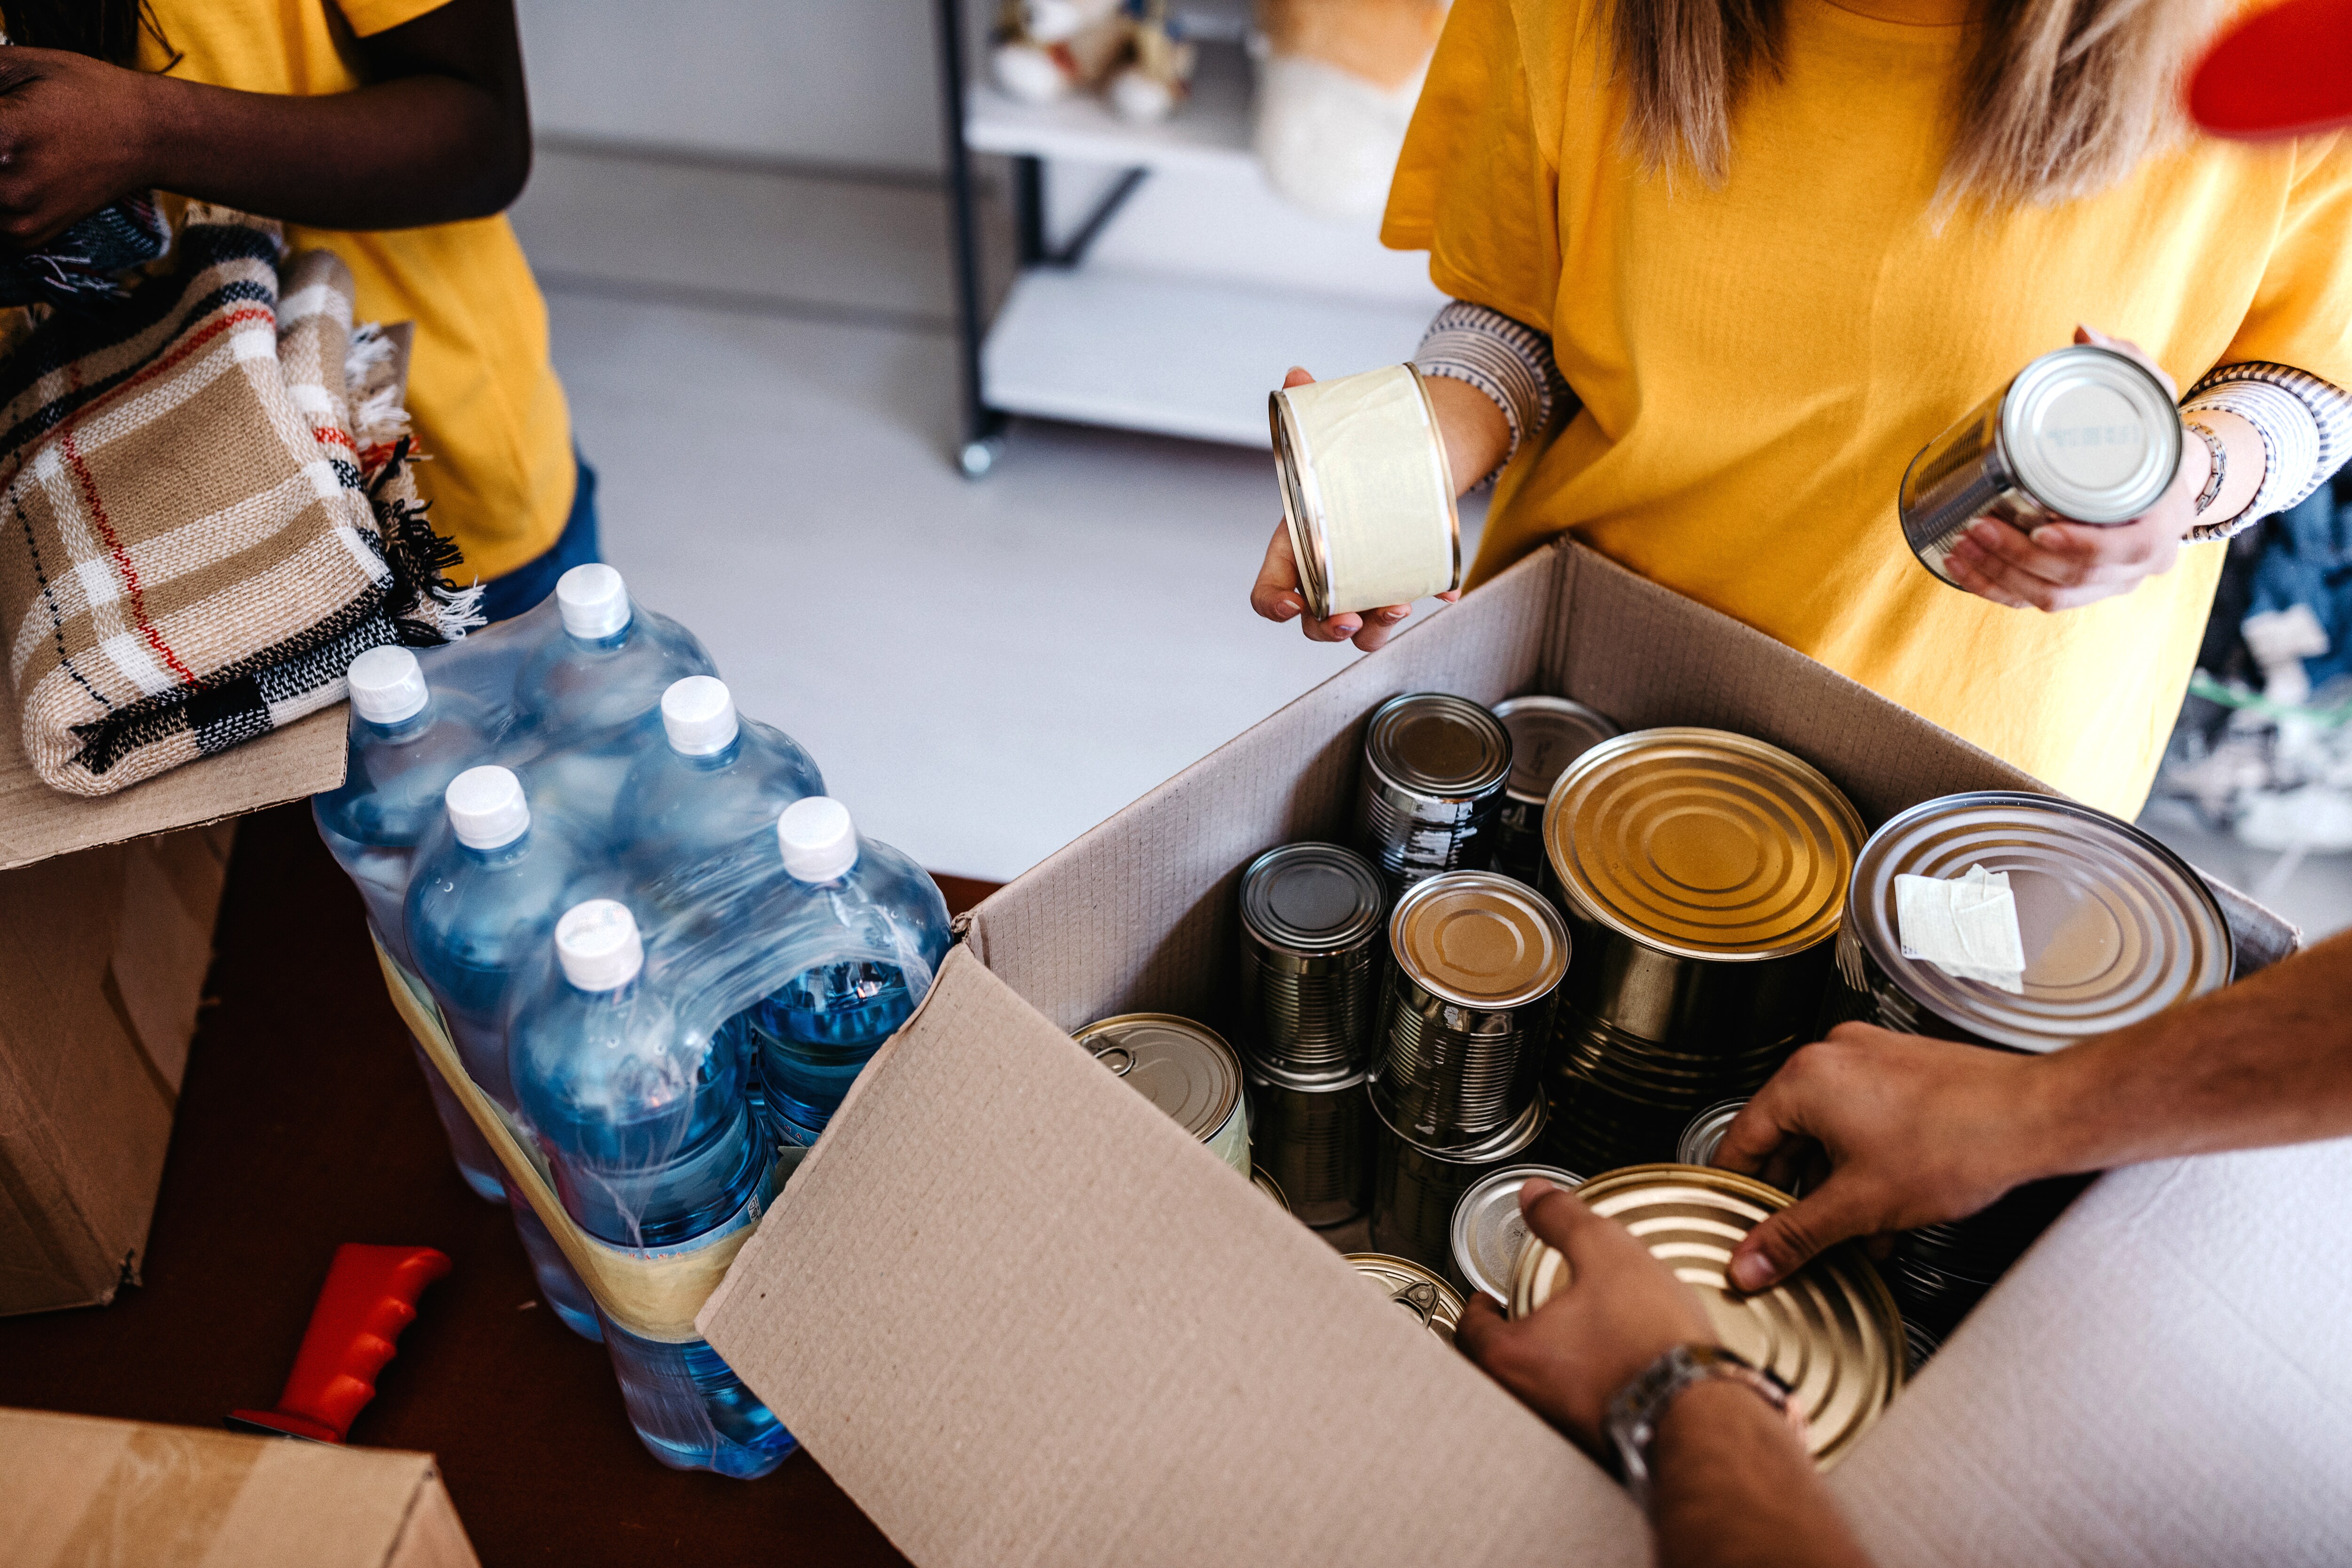 People pack canned goods into a box. A case of water sits next to the box on the table.